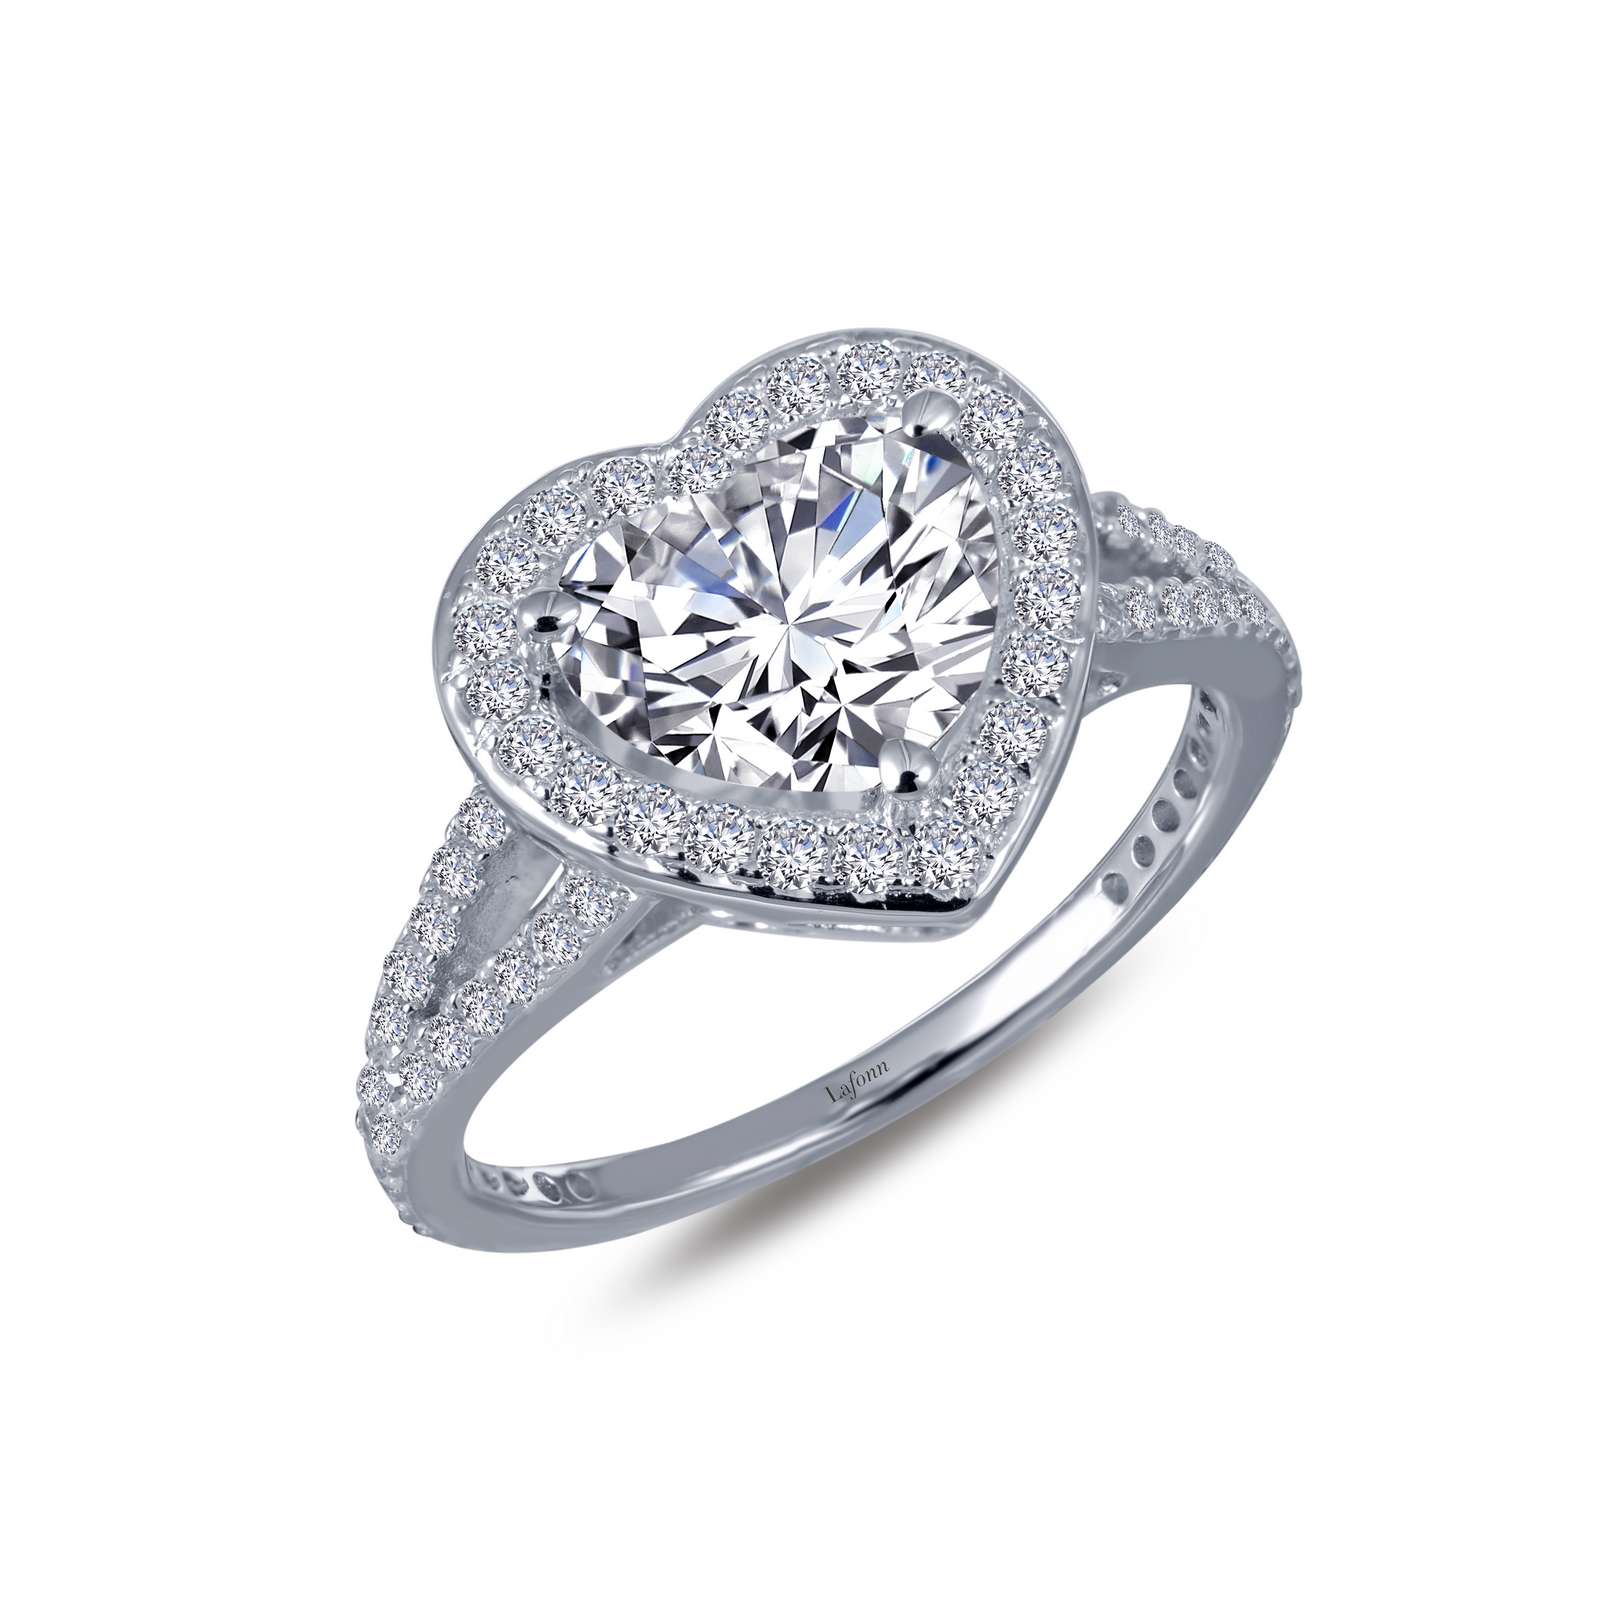 Heart-Shaped Halo Engagement Ring Griner Jewelry Co. Moultrie, GA